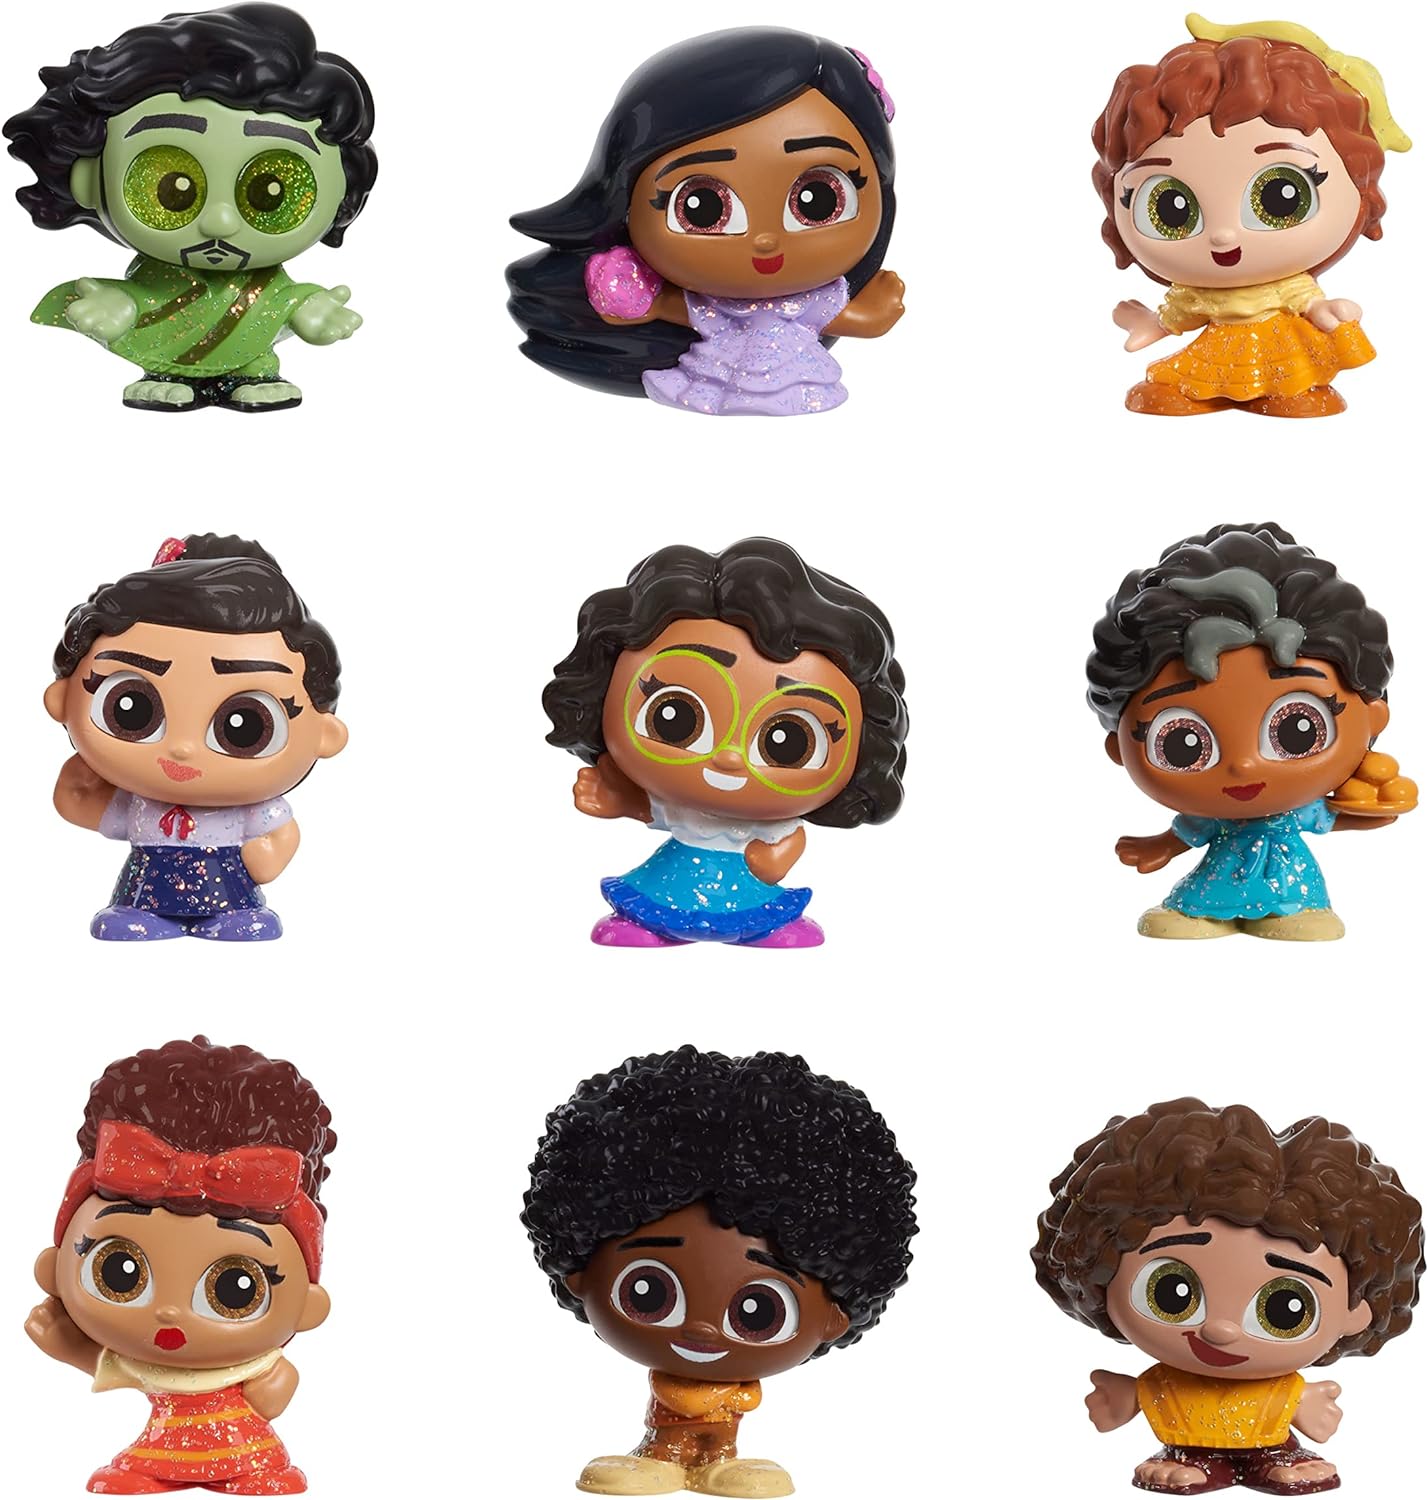 Disney Doorables Encanto Collection Peek, 9 Collectible Figurines, Kids Toys for Ages 5 Up by Just Play